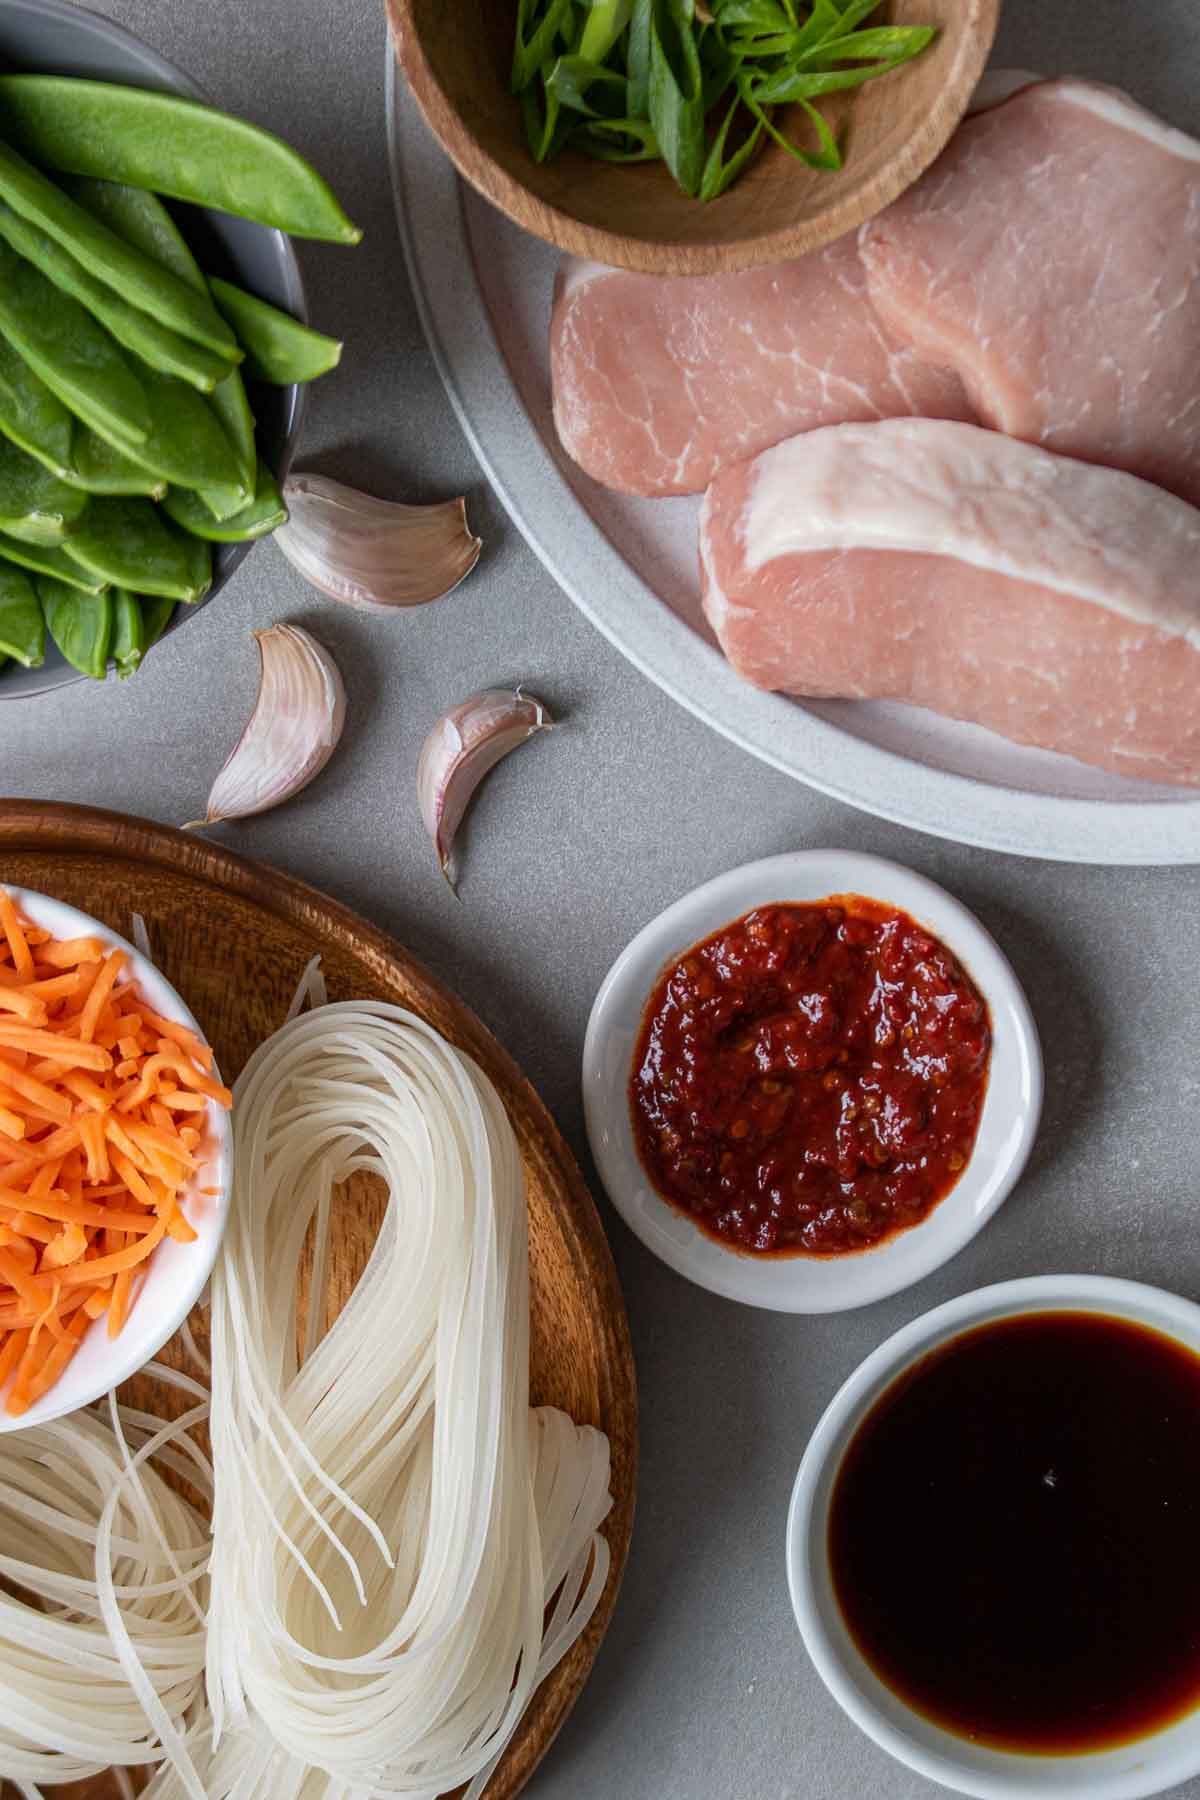 Ingredients for pork noodles; pork, rice noodles, chili paste, soy sauce, garlic, snow peas, and carrots.